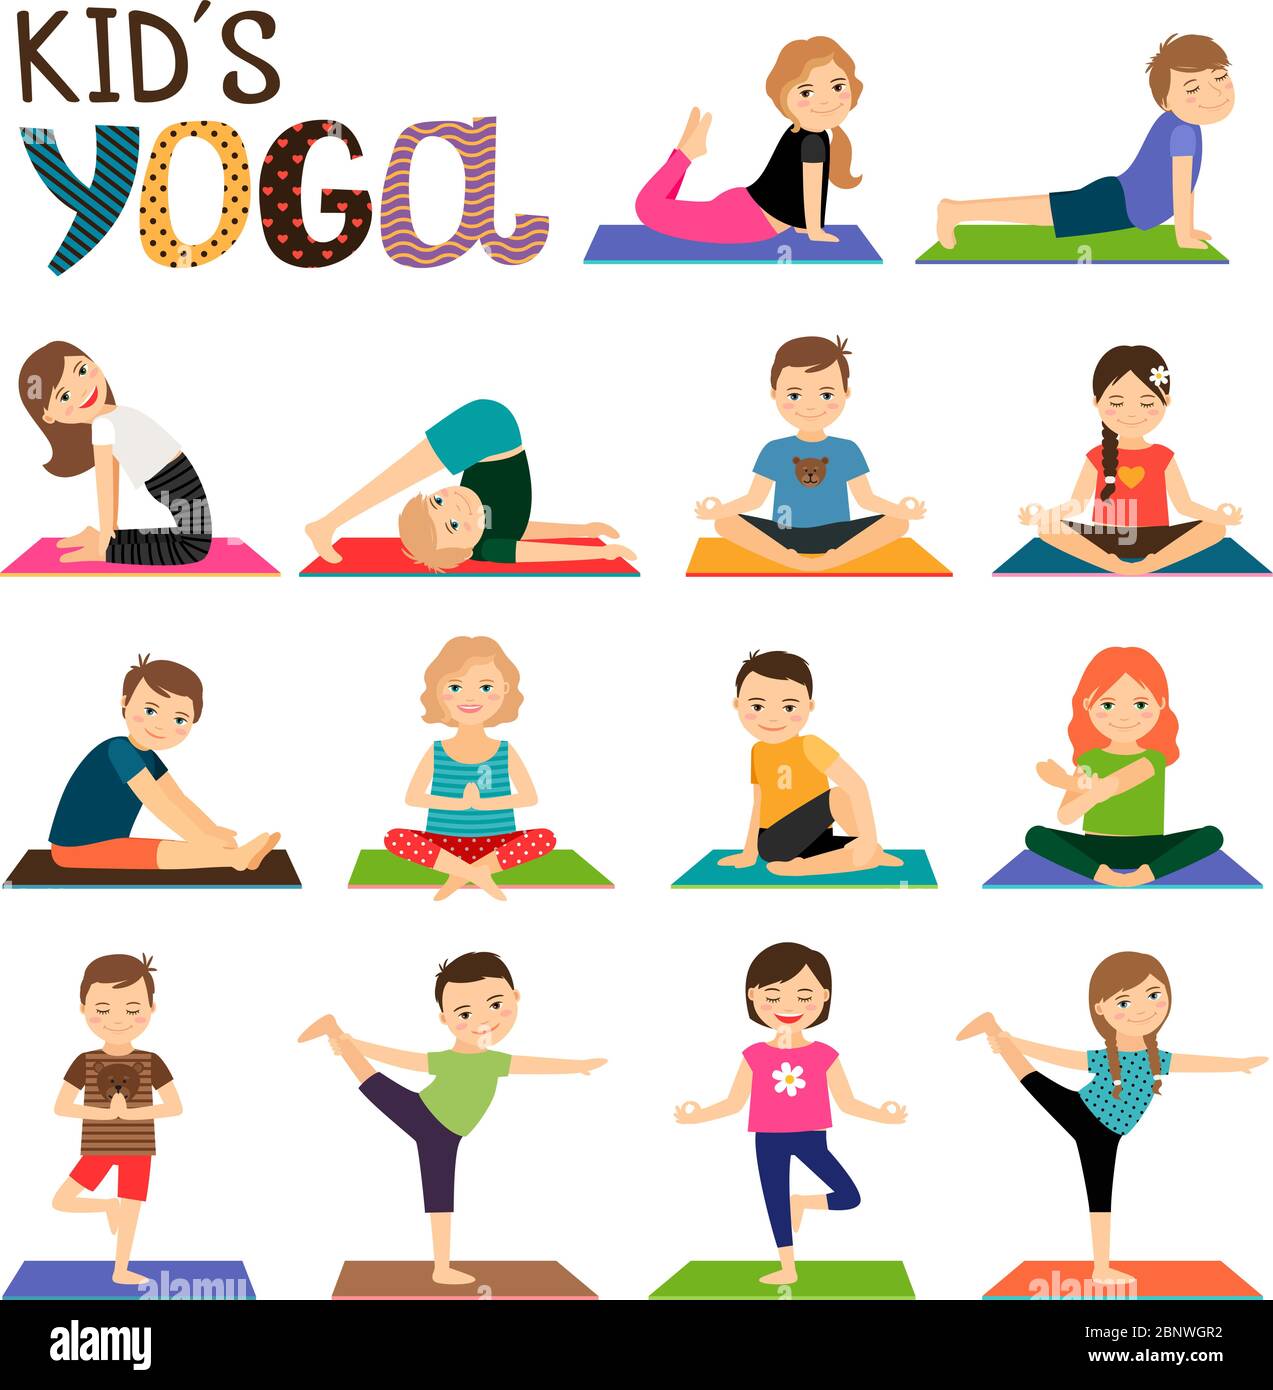 yoga positions for kids